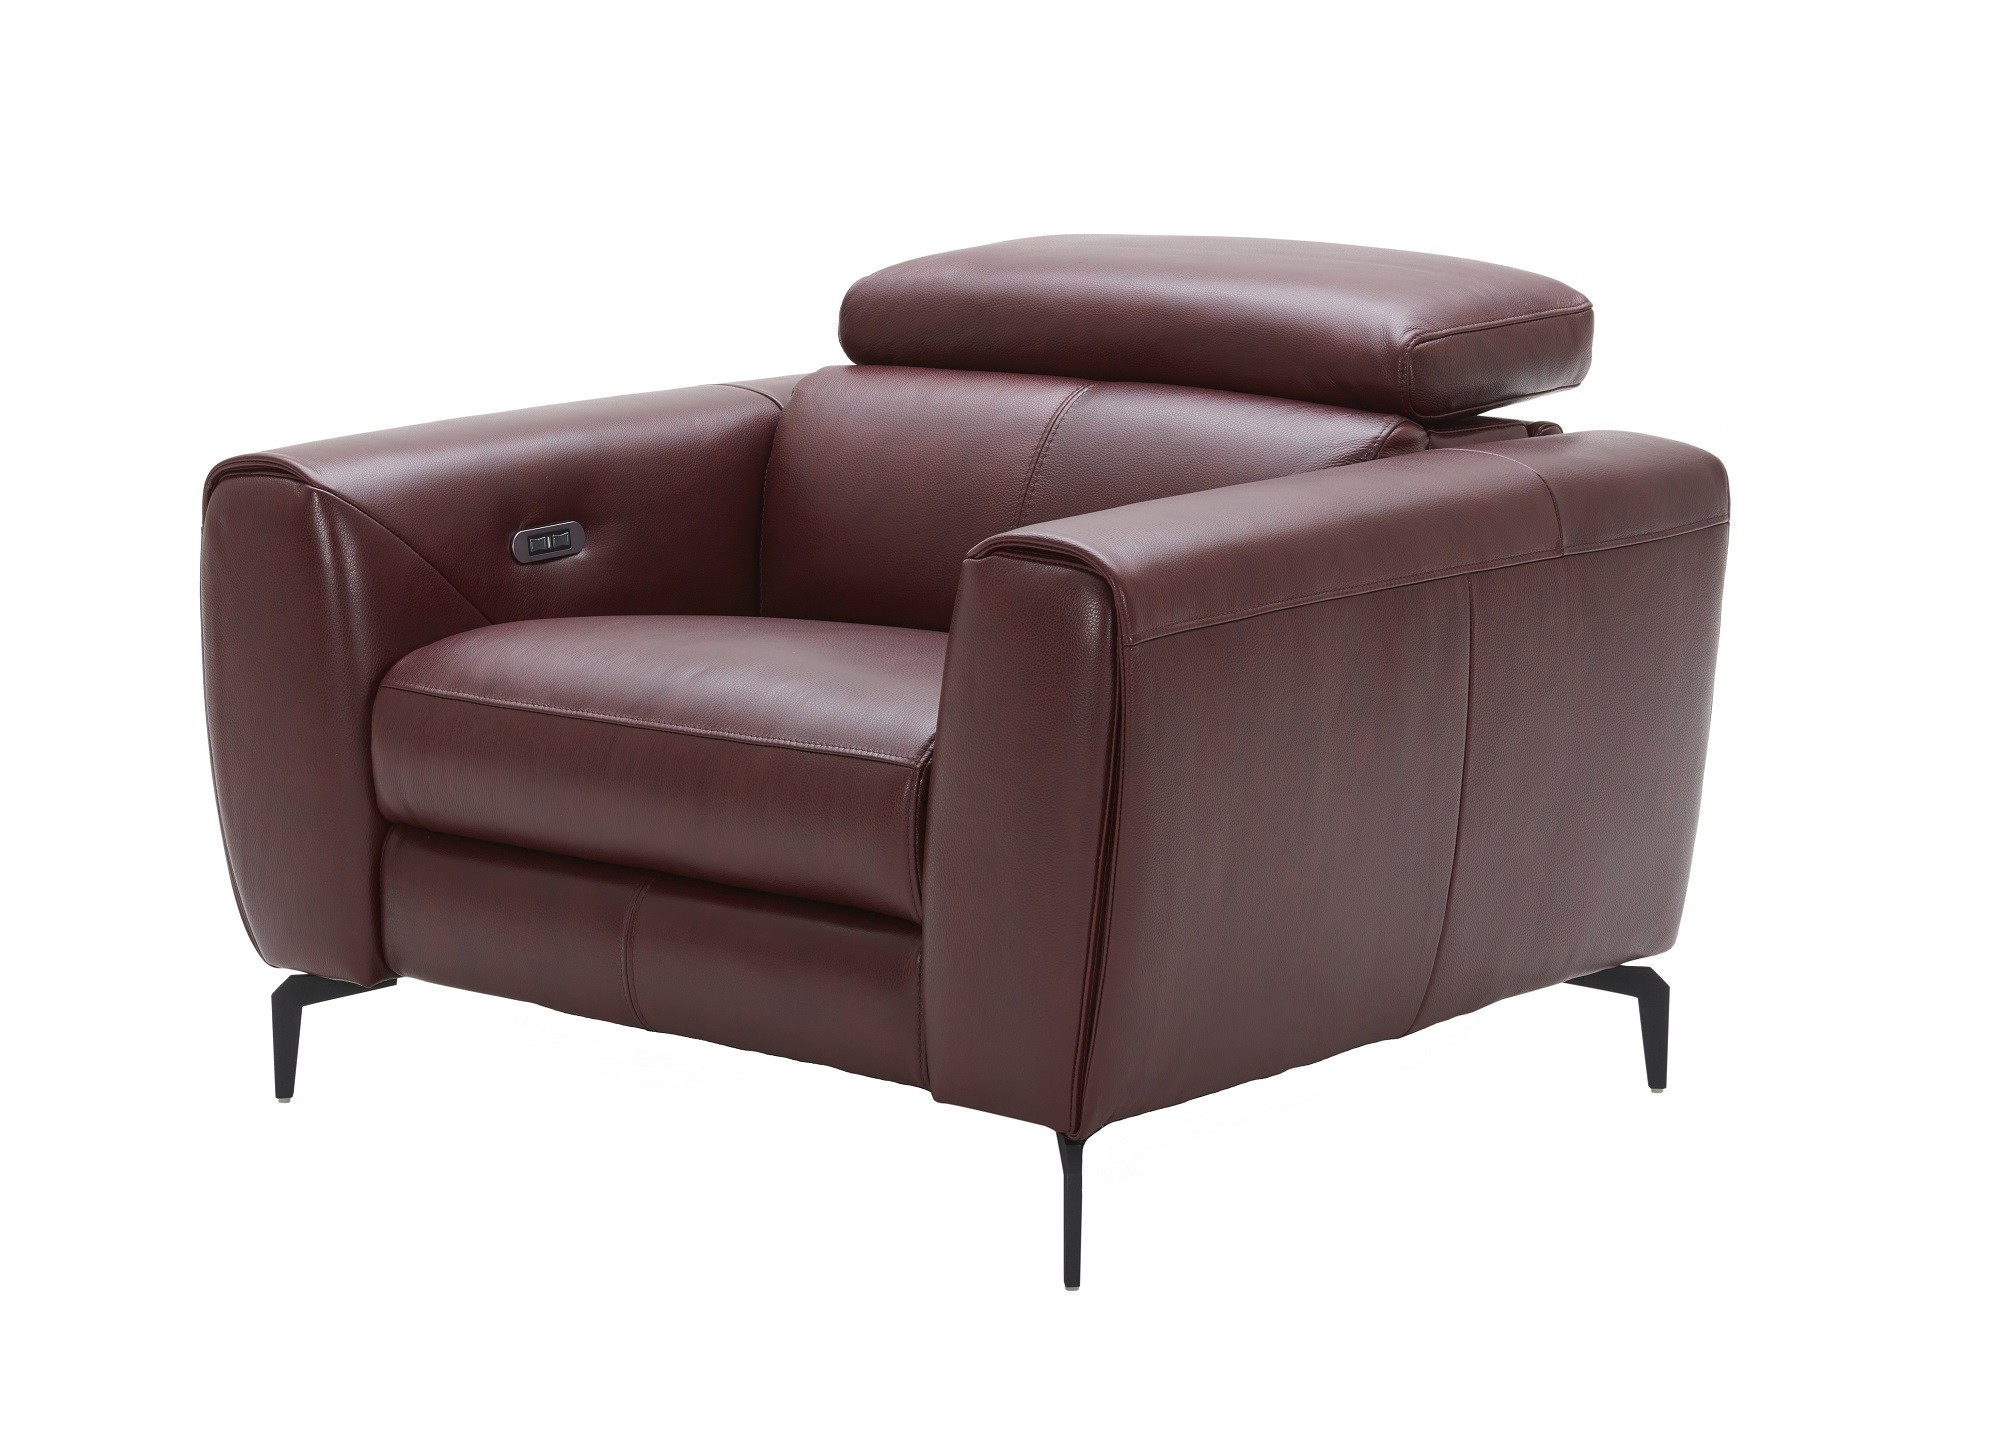 Top-Grain Leather Living Room Sofas - Click Image to Close